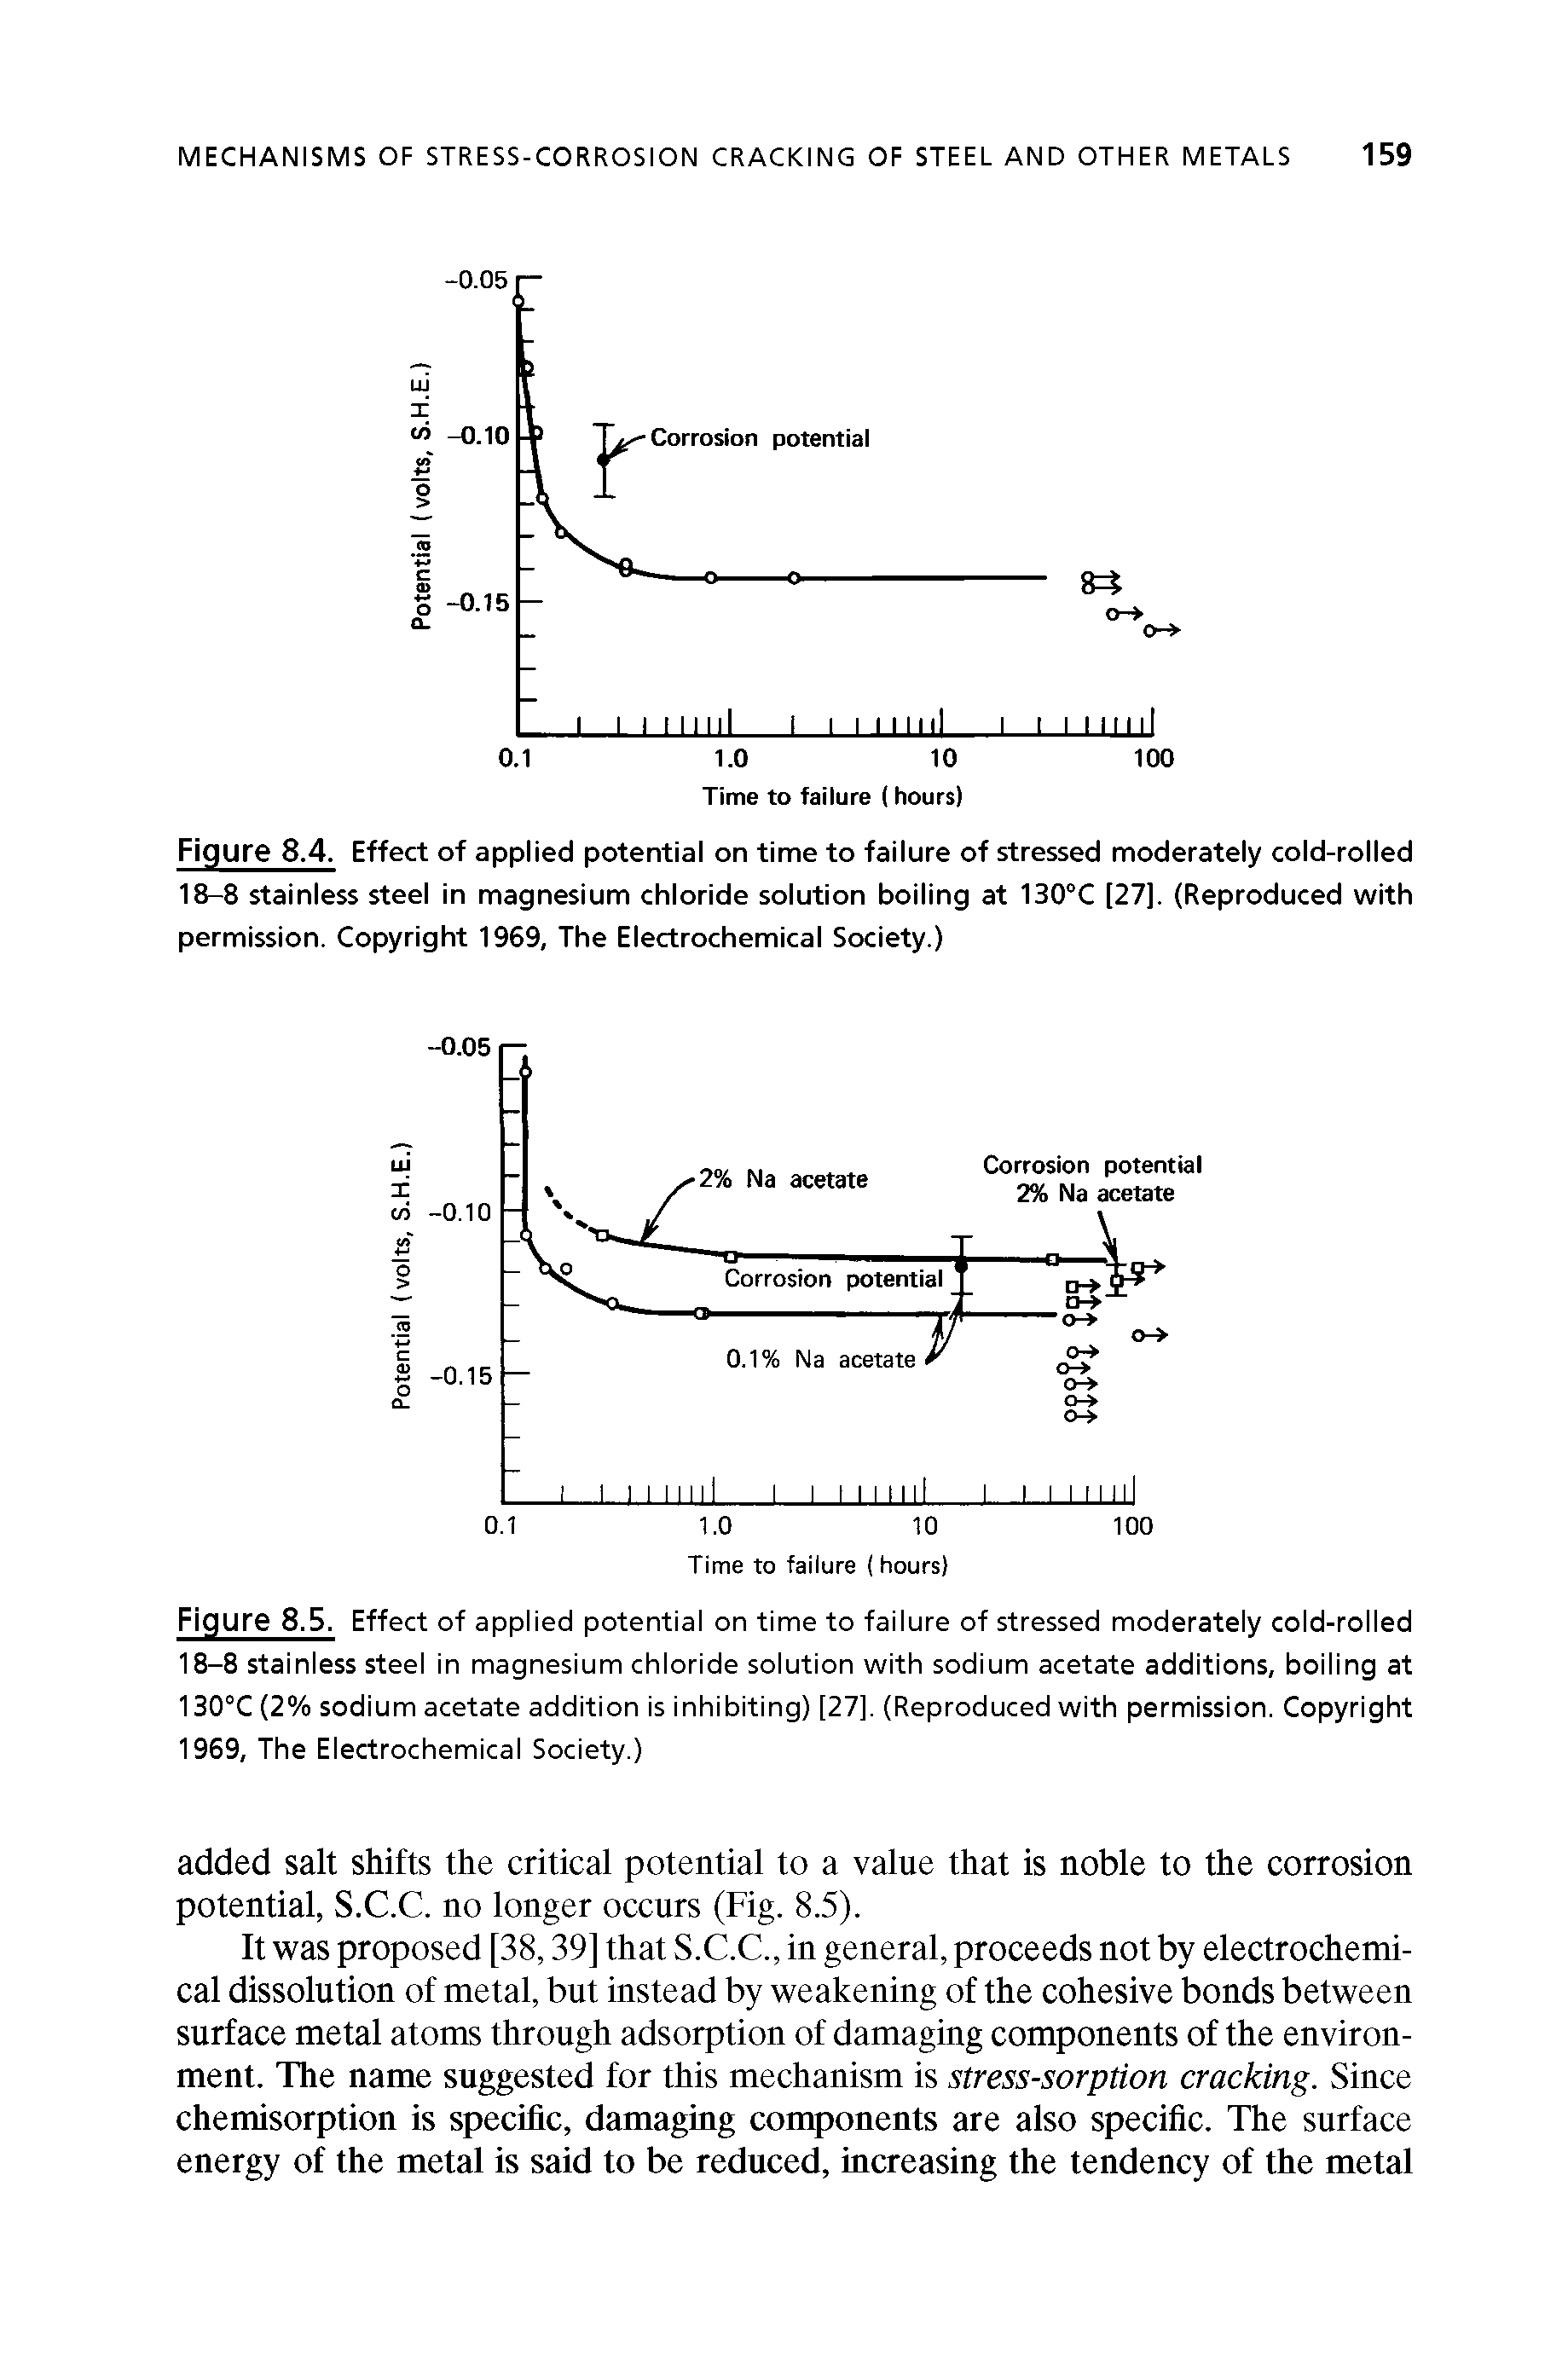 Figure 8.4. Effect of applied potential on time to failure of stressed moderately cold-rolled 18-8 stainless steel in magnesium chloride solution boiling at 130 C [27]. (Reproduced with permission. Copyright 1969, The Electrochemical Society.)...